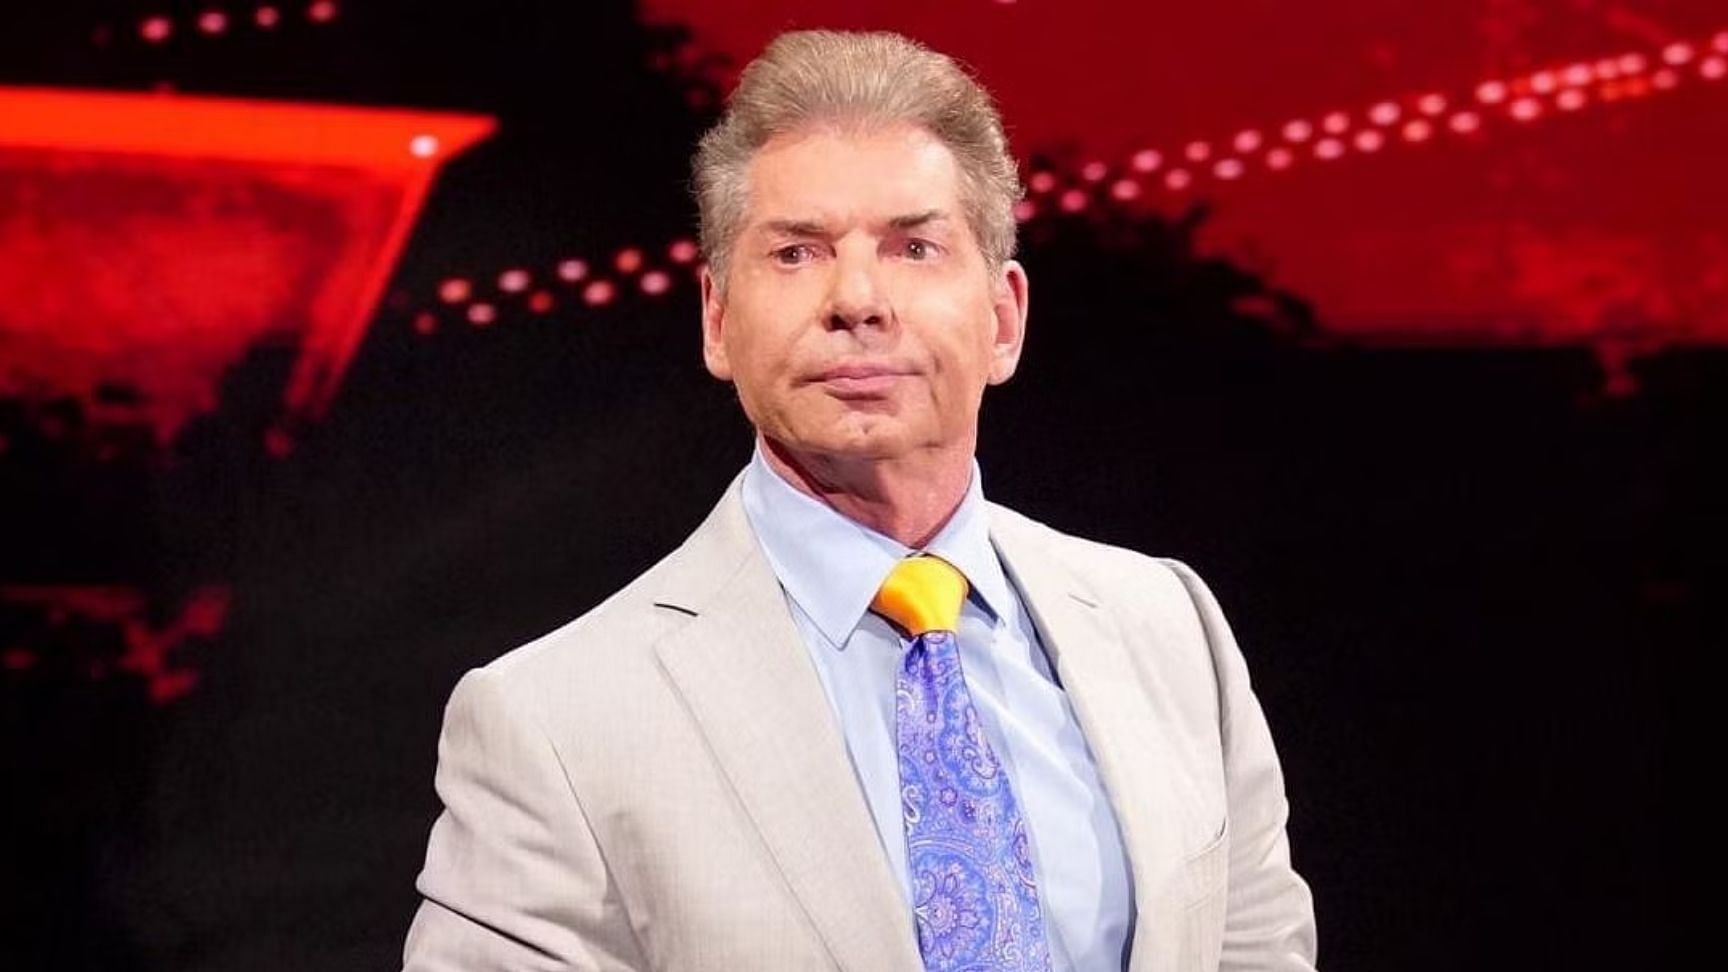 Vince McMahon has returned to WWE